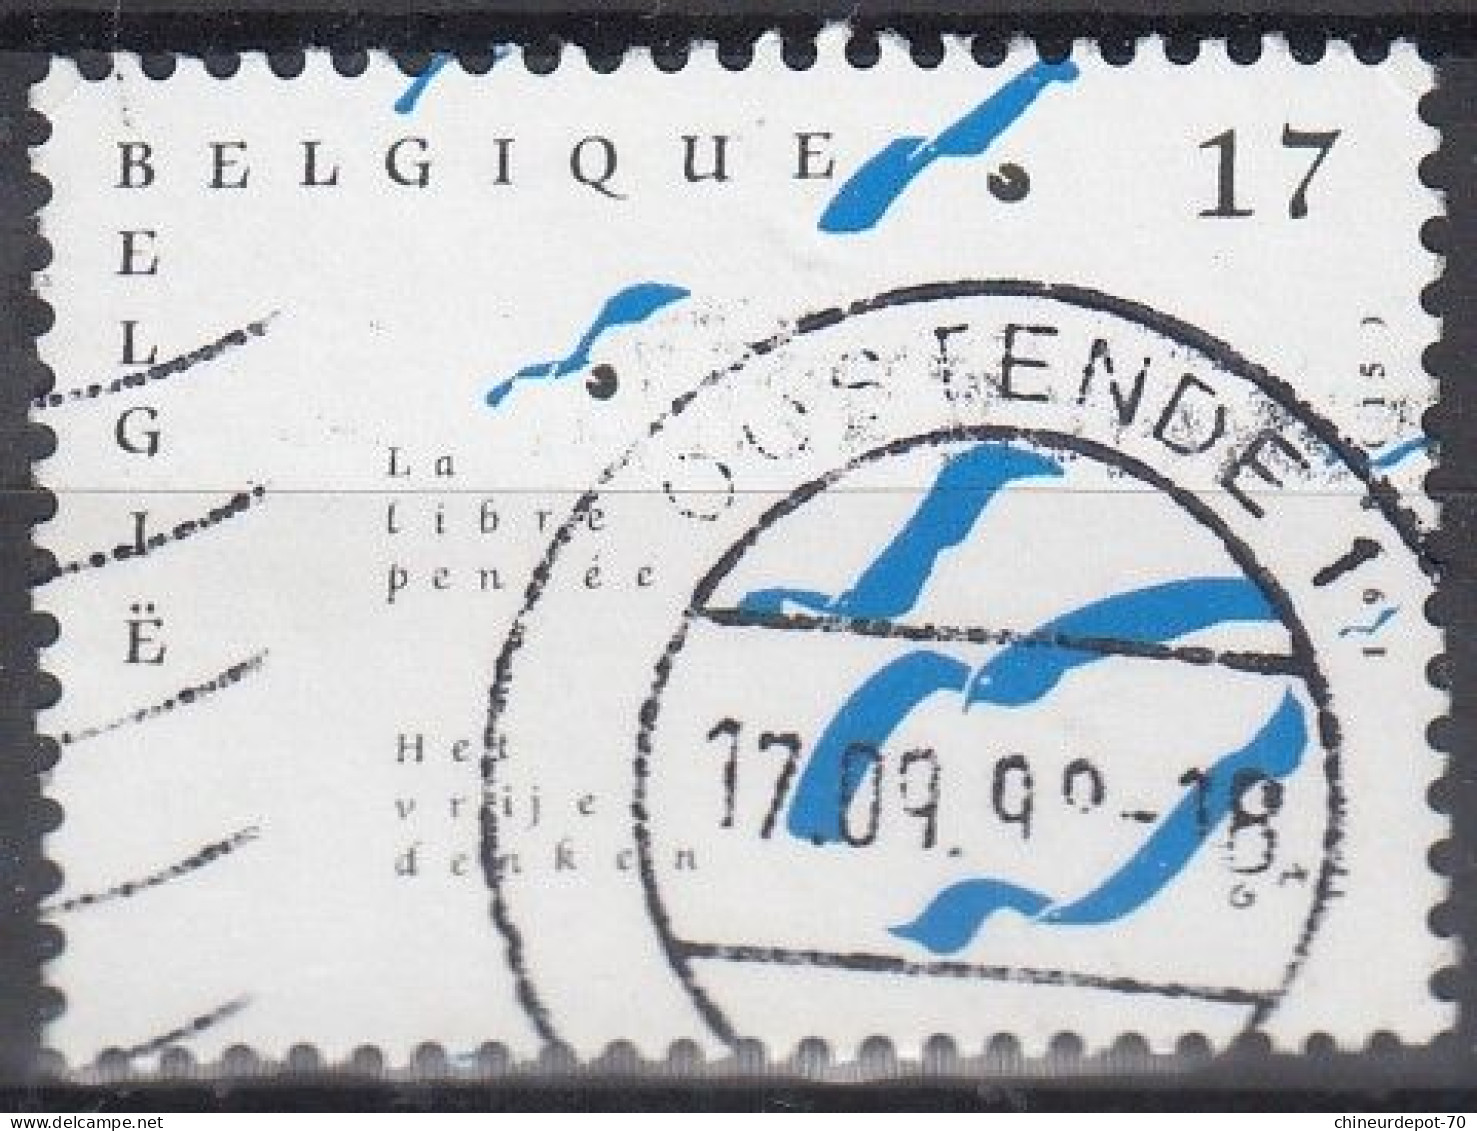 La Libre Pensee 1998 Cachet Oostende - Used Stamps